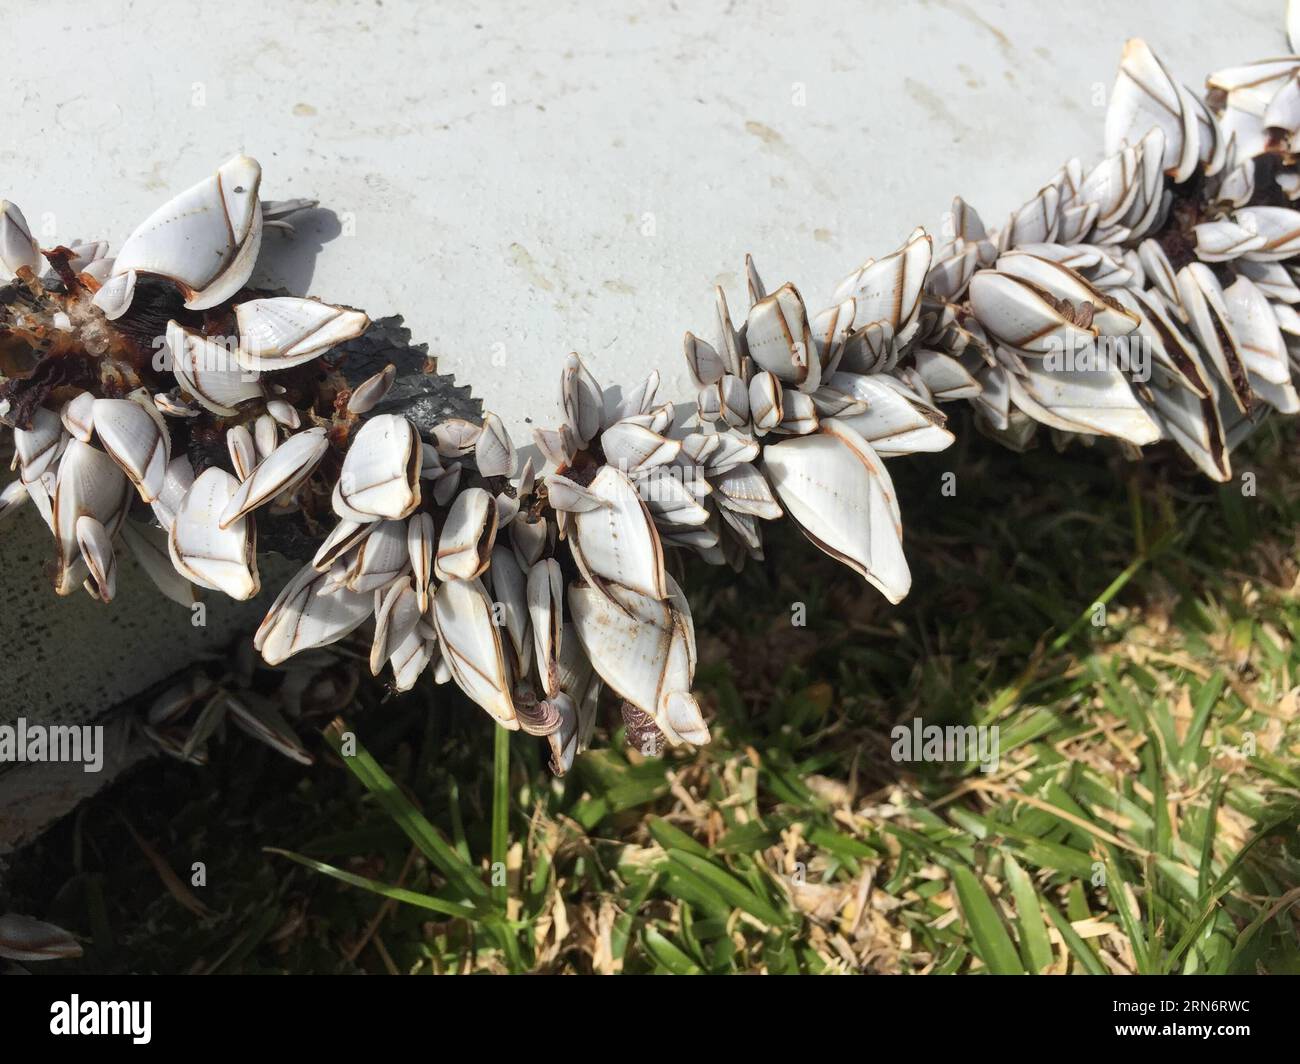 (150806) -- THE REUNION ISLAND,  - Photo taken on Jul.29, 2015, shows shells growing on a piece of debris on Reunion Island. Verification had confirmed that the debris discovered on Reunion Island belongs to missing Malaysian Airlines flight MH370, Malaysian Prime Minister Najib Razak announced early Thursday. ) (jmmn) (FOCUS) THE REUNION ISLAND-MH 370 FLIGHT-DEBIRS RomainxLatournerie PUBLICATIONxNOTxINxCHN   150806 The Reunion Iceland Photo Taken ON JUL 29 2015 Shows Shells Growing ON a Piece of debris ON Reunion Iceland Verification had confirmed Thatcher The debris discovered ON Reunion Ice Stock Photo